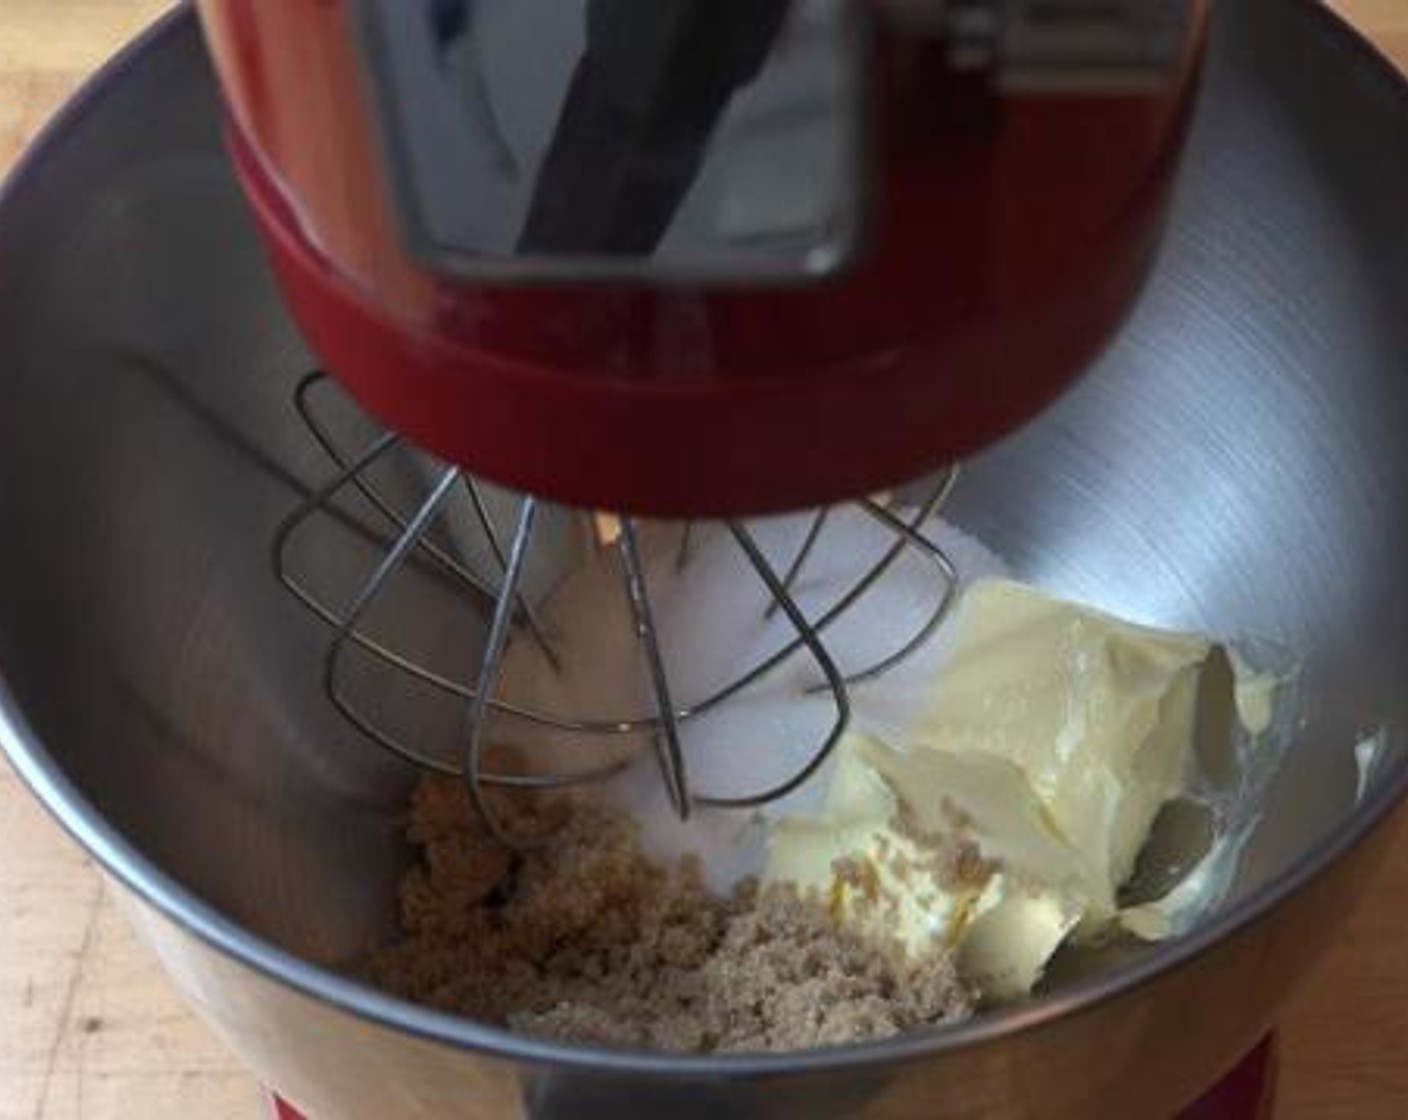 step 2 Inside a mixer, combine together the Butter (1/2 cup), Caster Sugar (1/2 cup), and Brown Sugar (1/2 cup).